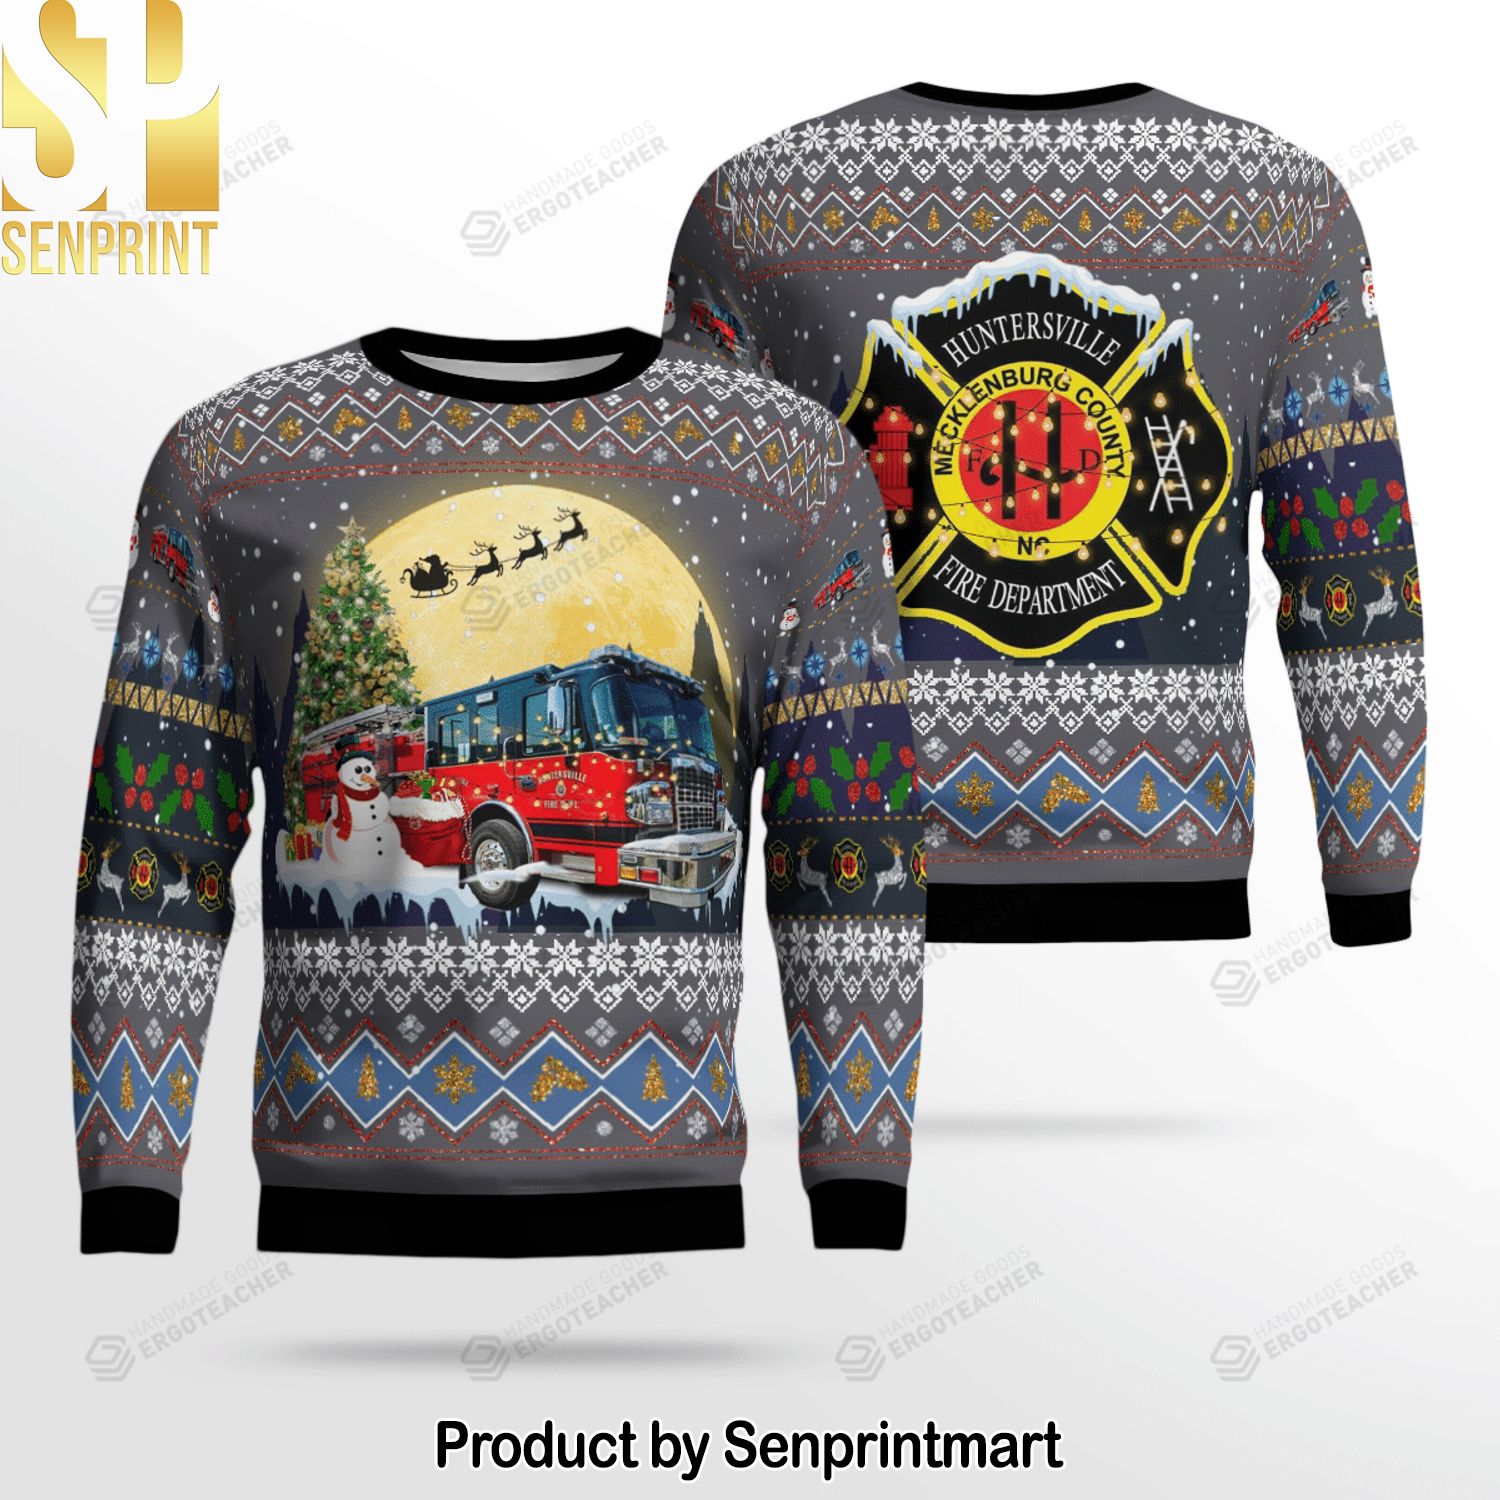 North Carolina Huntersville Fire Department 3D Printed Ugly Christmas Sweater